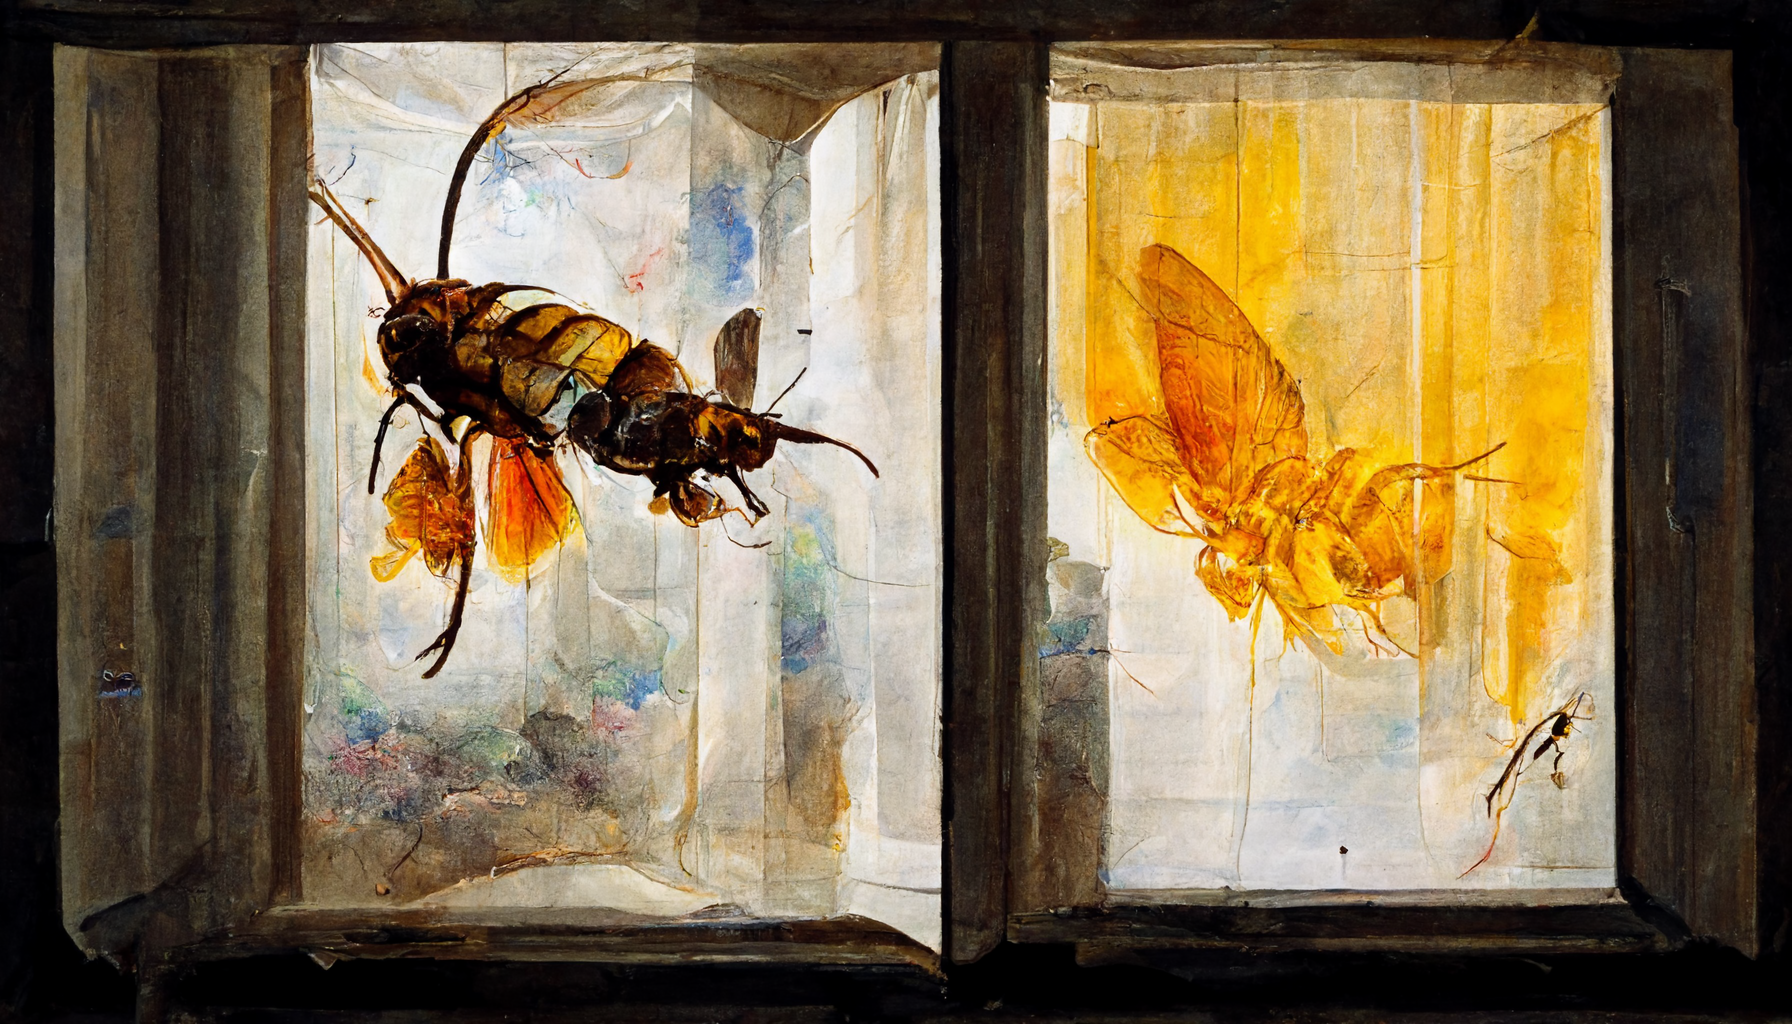 a giant hornet buzzing against the inside of a curtained window